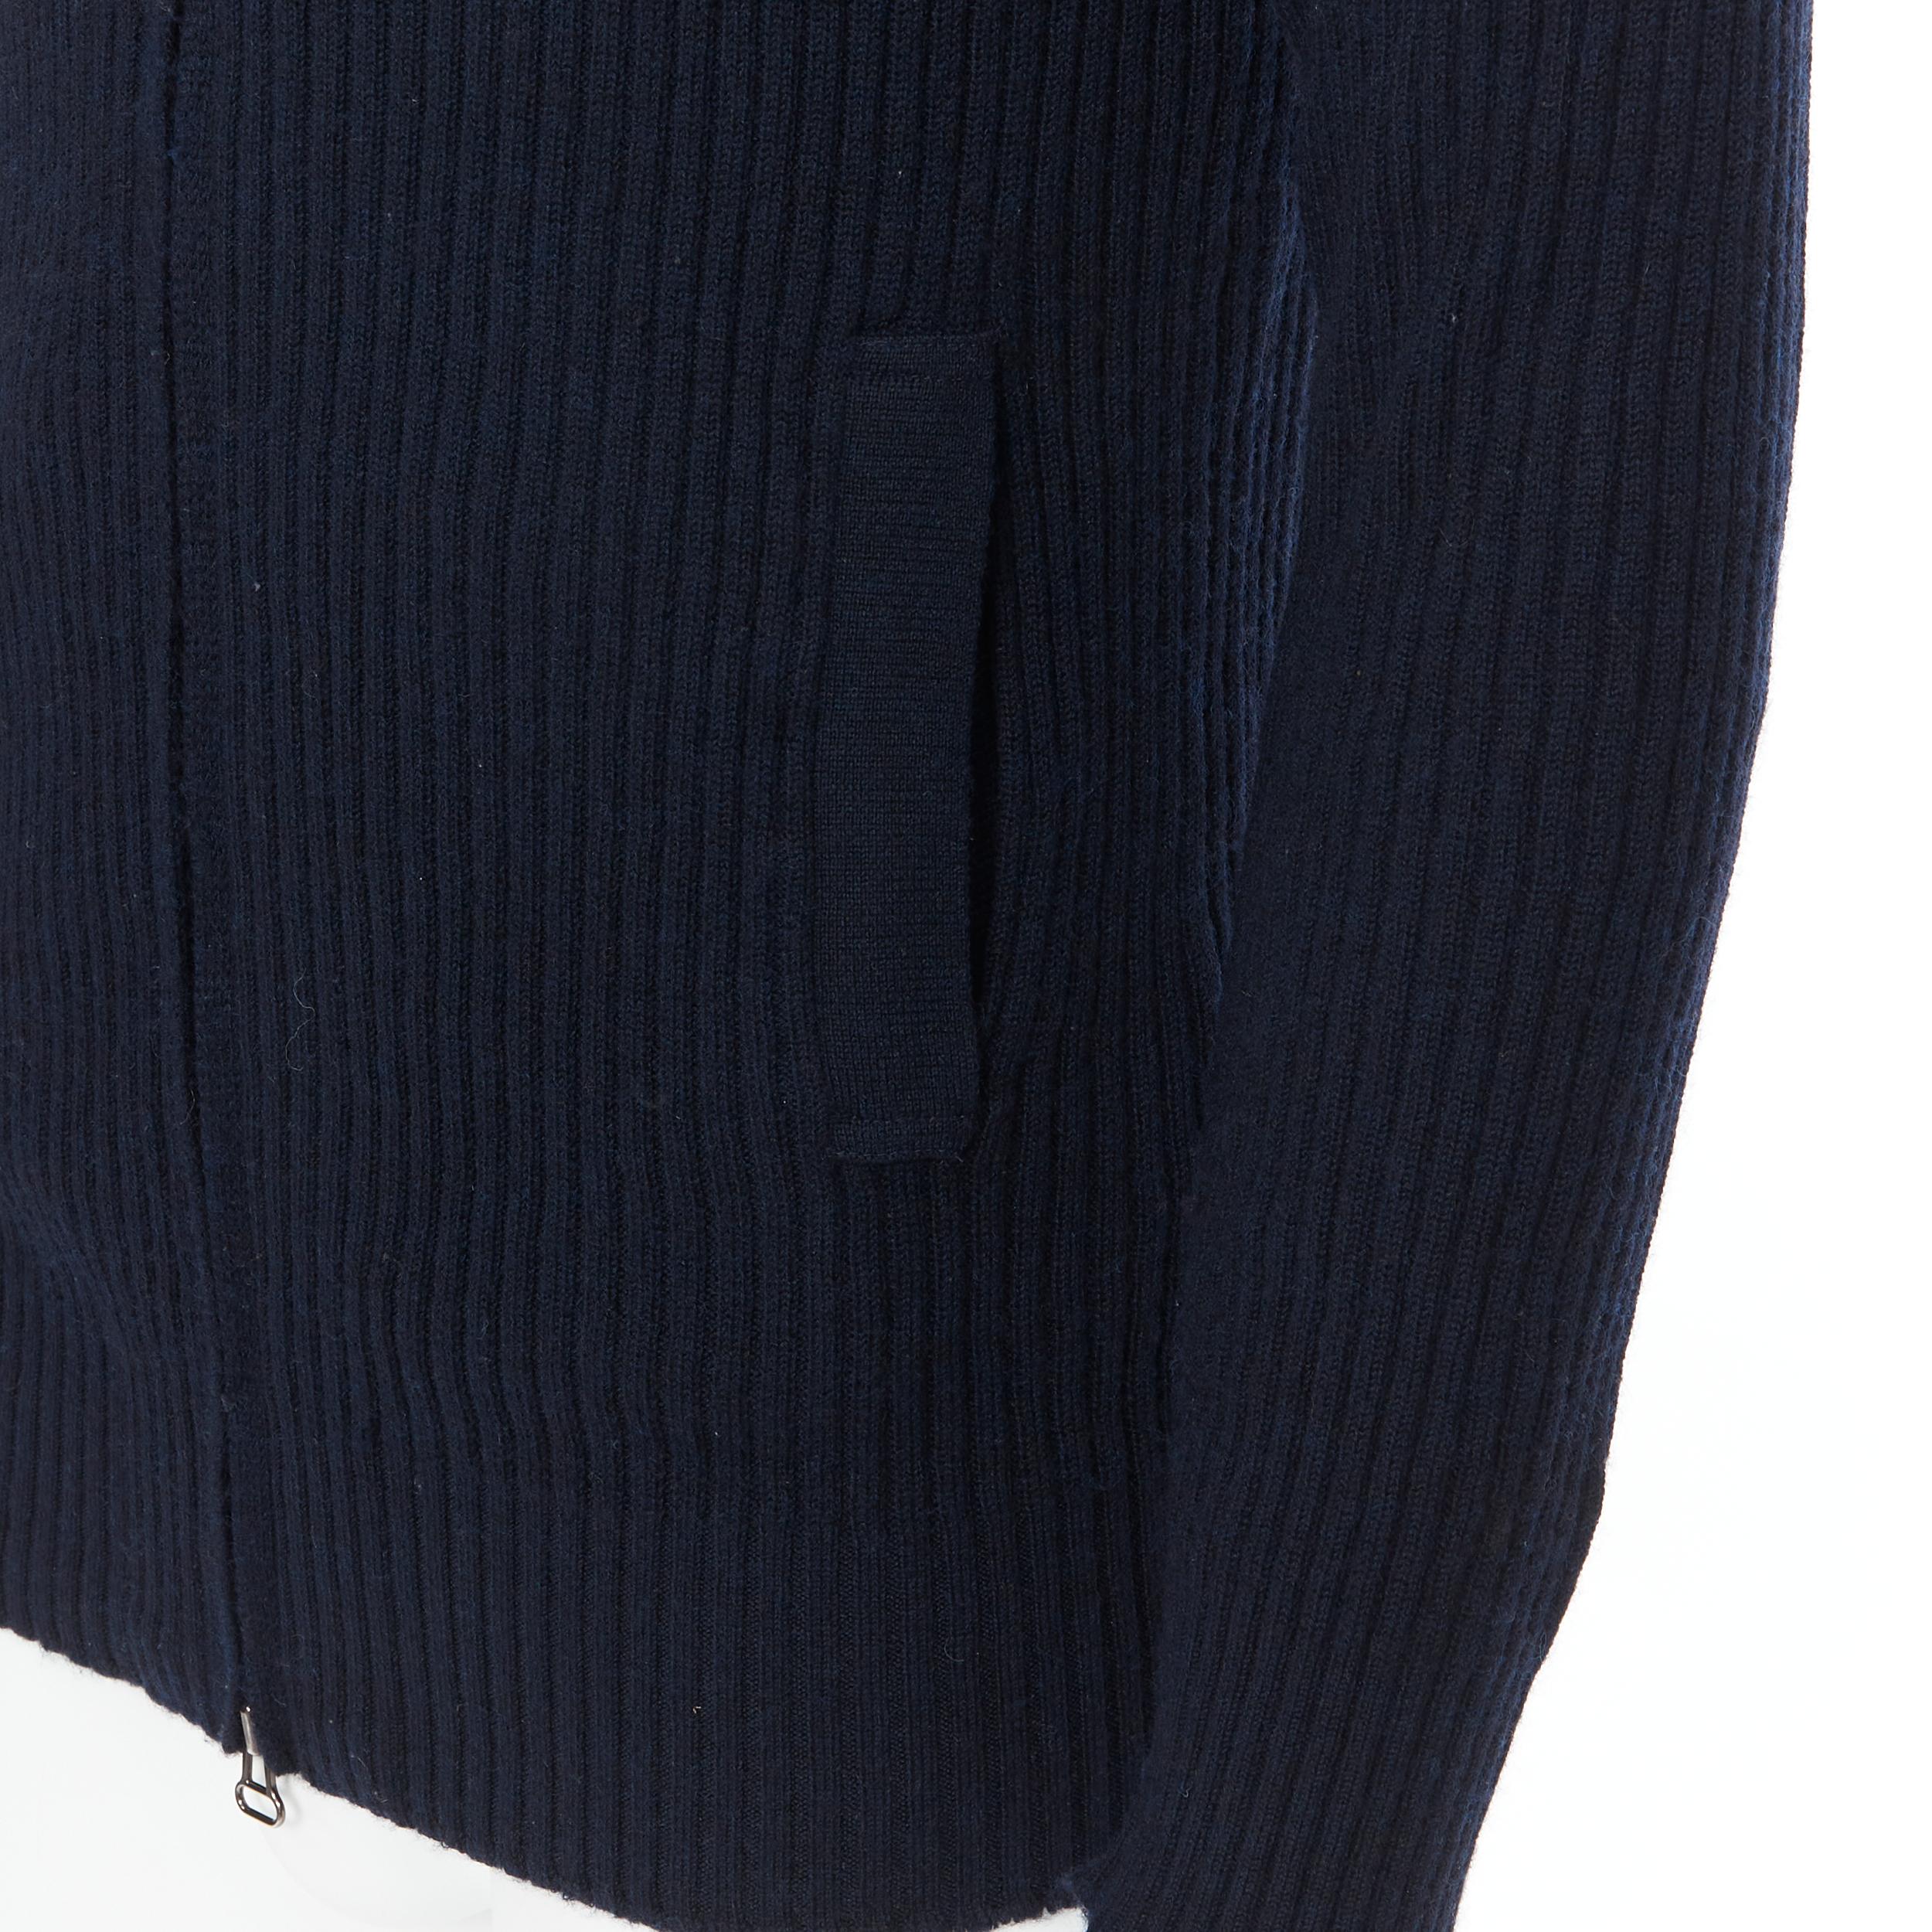 45R 100% wool navy blue ribbed knit zip military patch cardigan sweater JP4 S 3